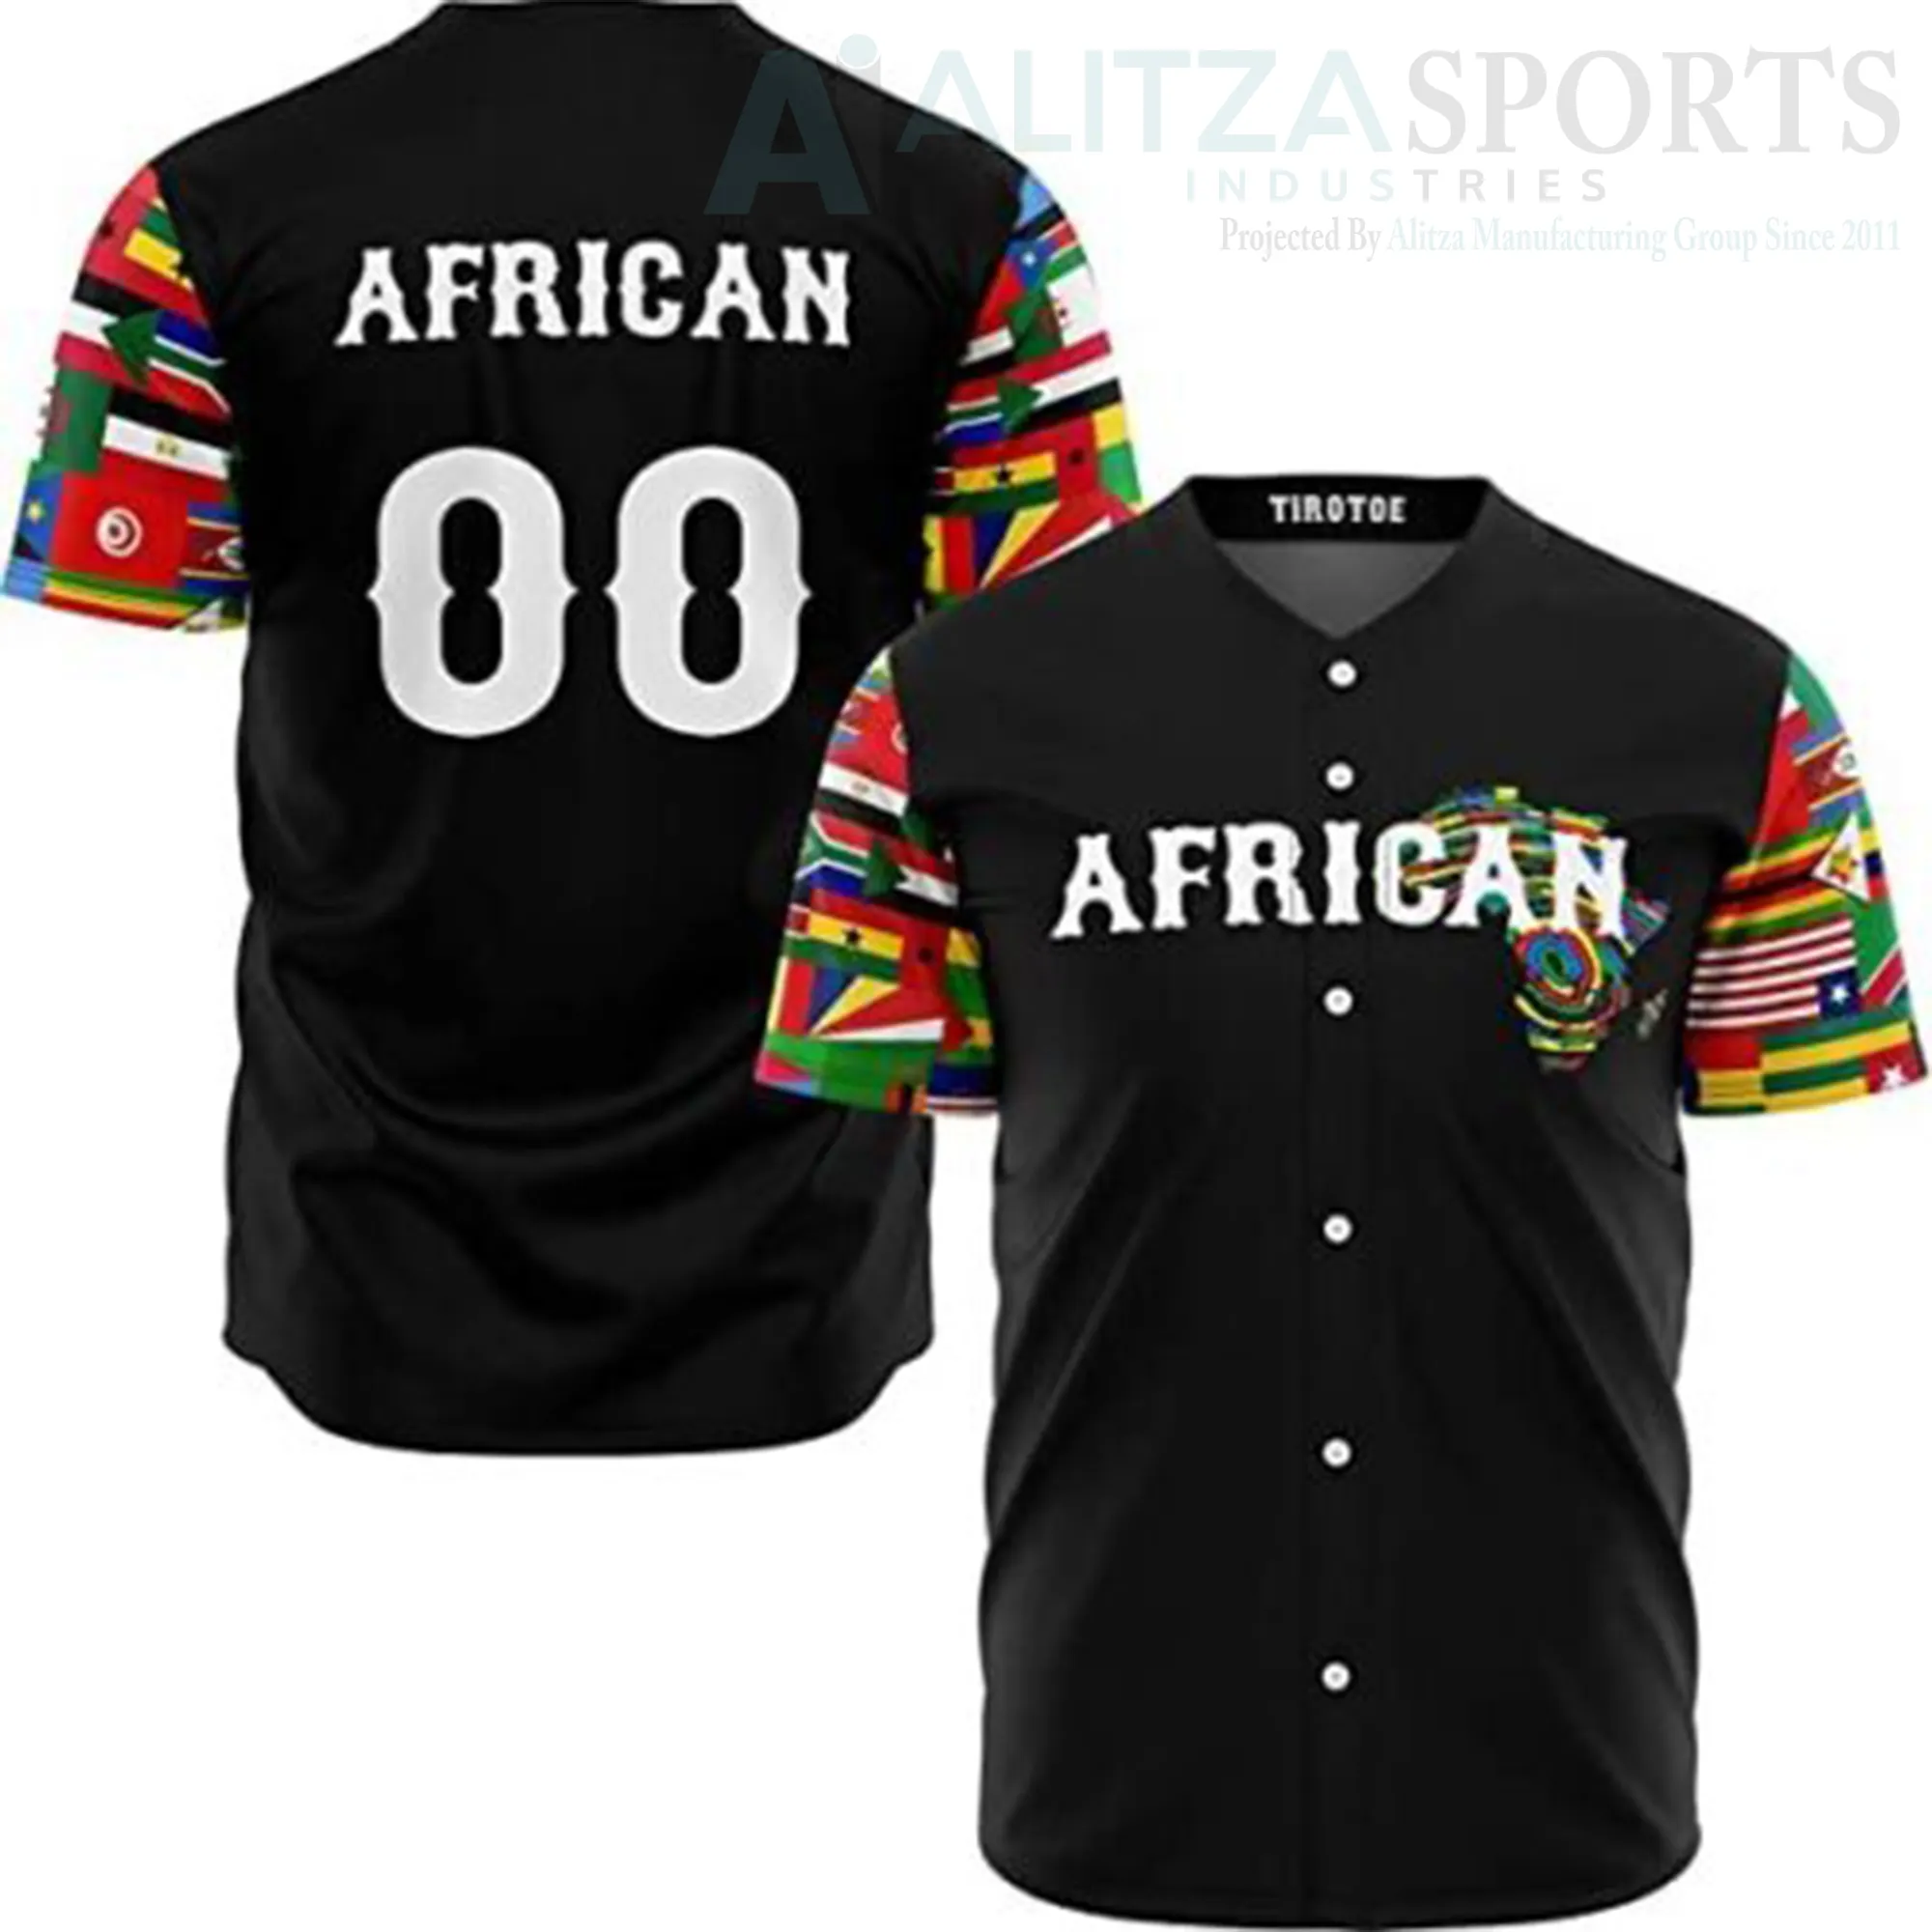 Custom Design Sublimation Printed The Coolest Baseball Jerseys Every Fashion Forward Player Should Own Made In Pakistan